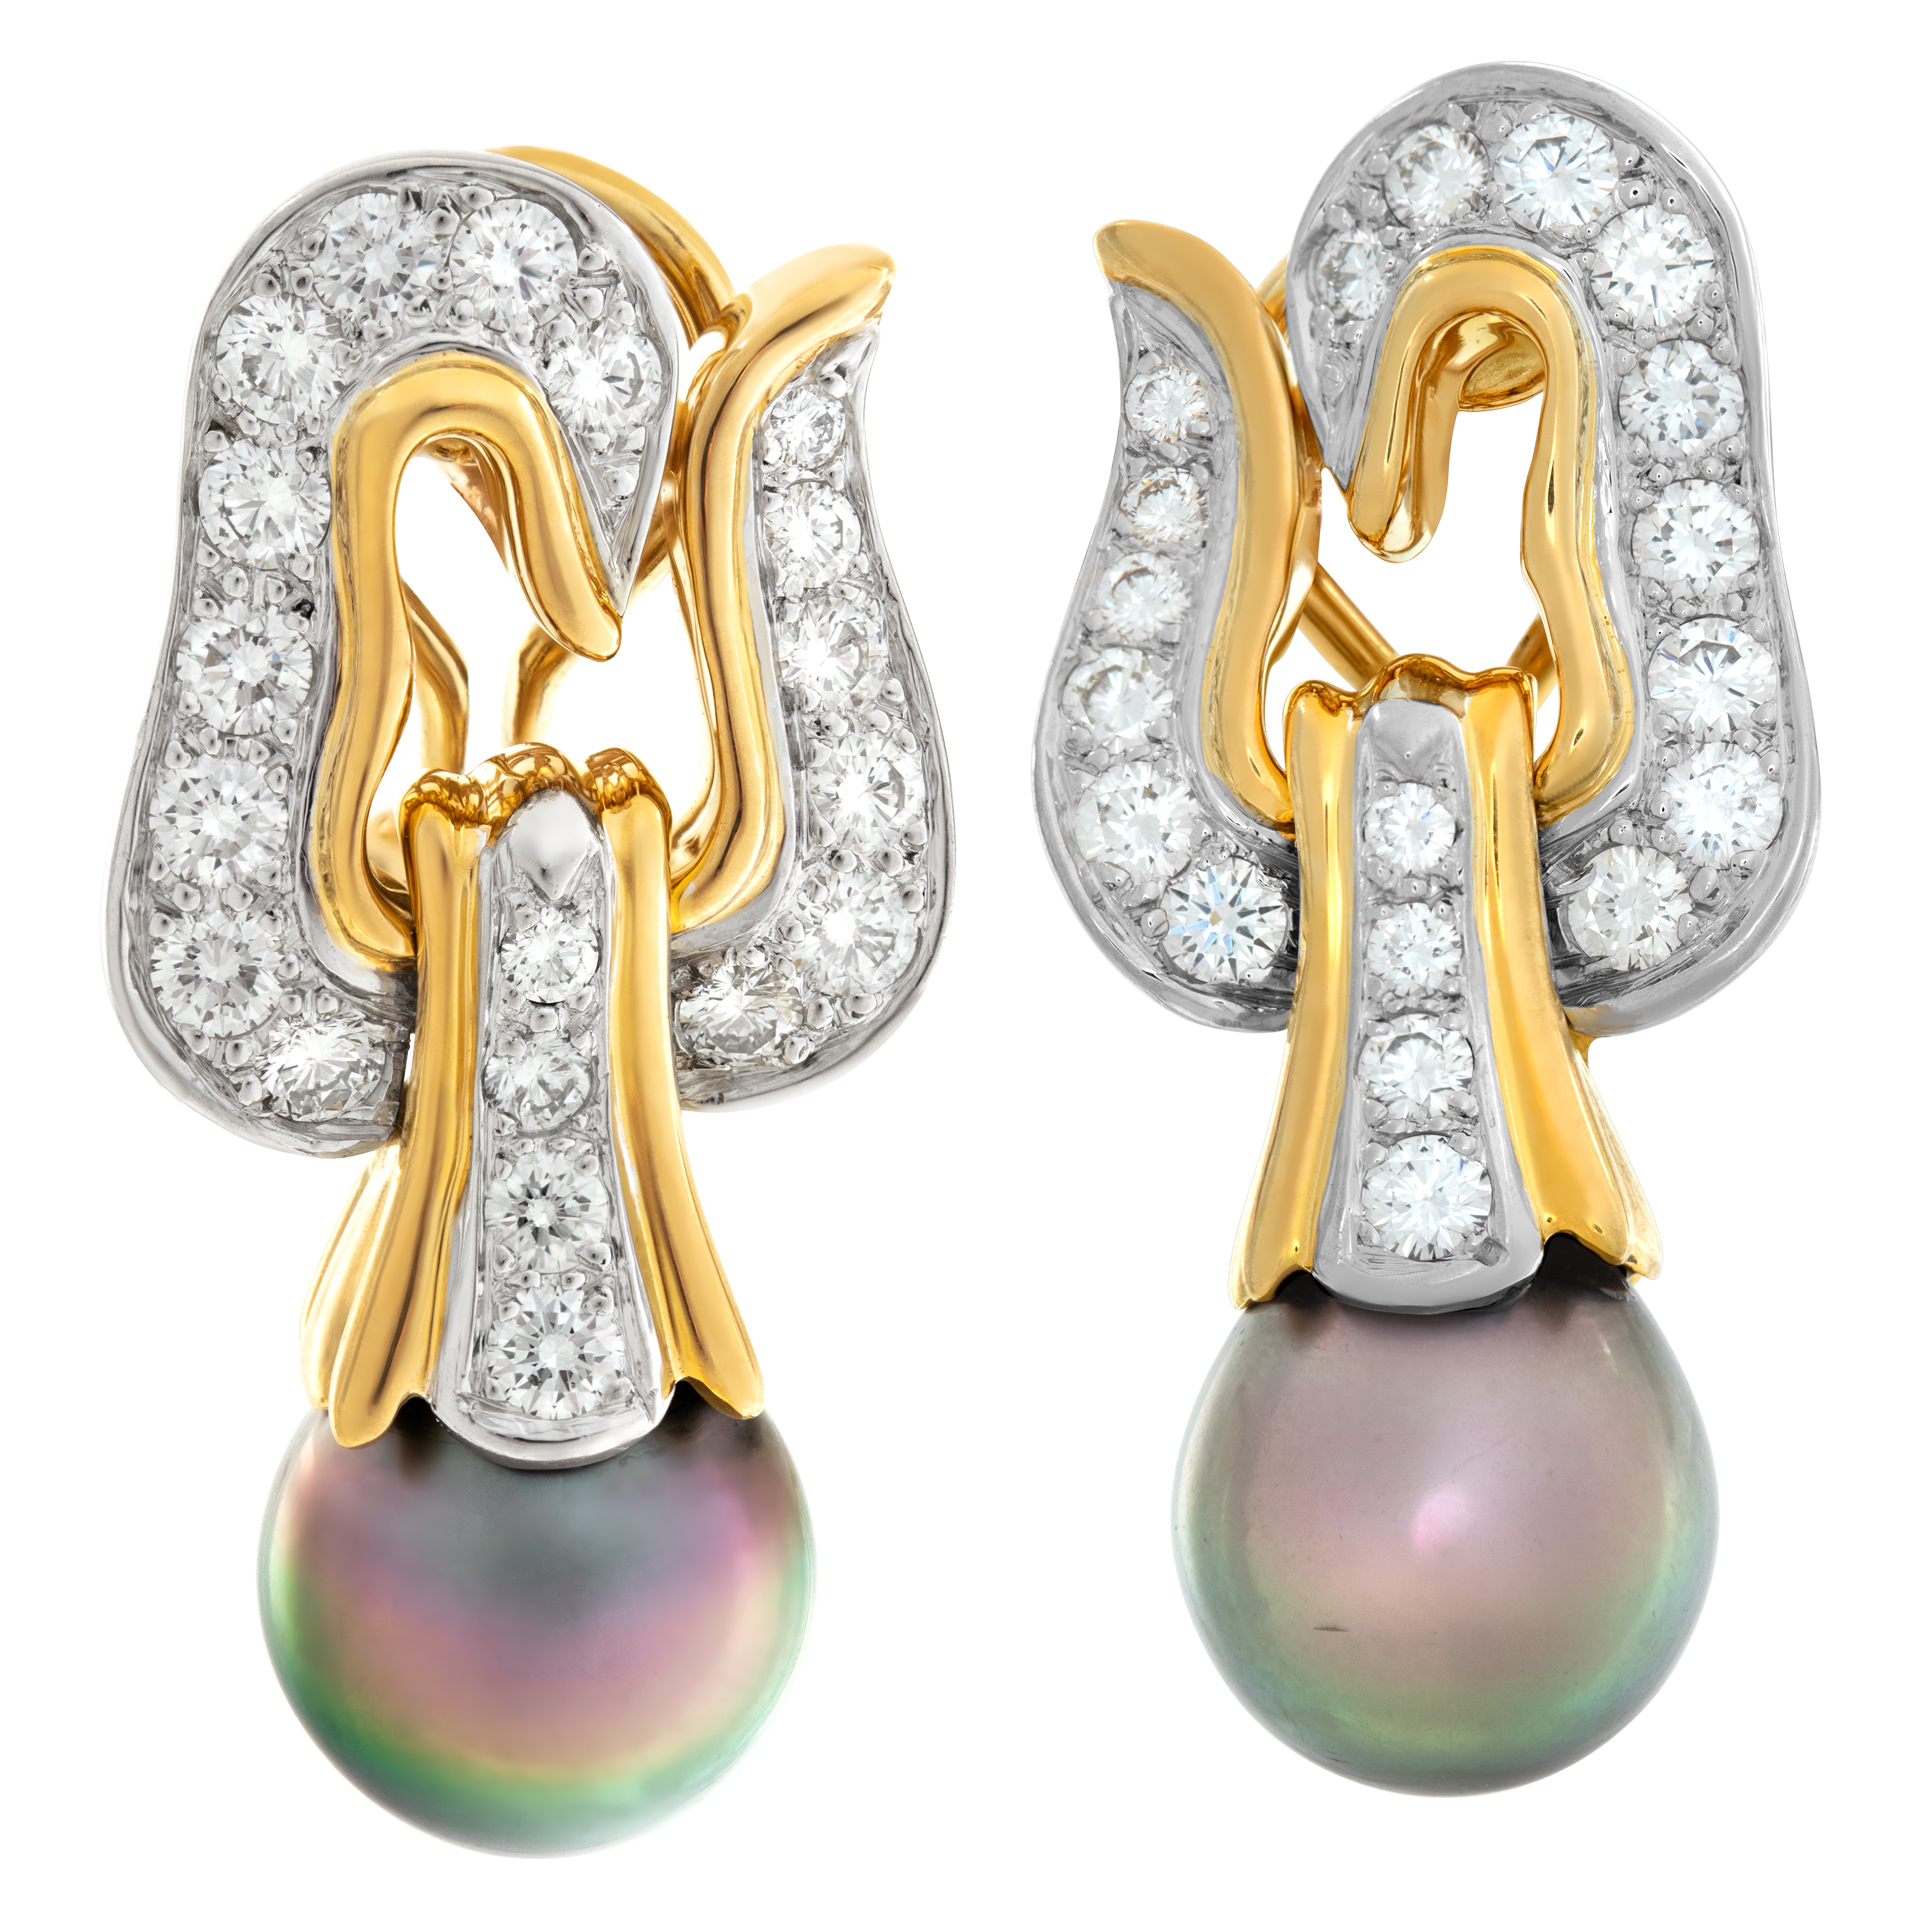 Tiffany & Co.1999  Angela Cumming Tahitian Grey Pearls & Diamonds Earrings In 18k Gold & Platinum. Approx. 2.50 Cats Total Weight.